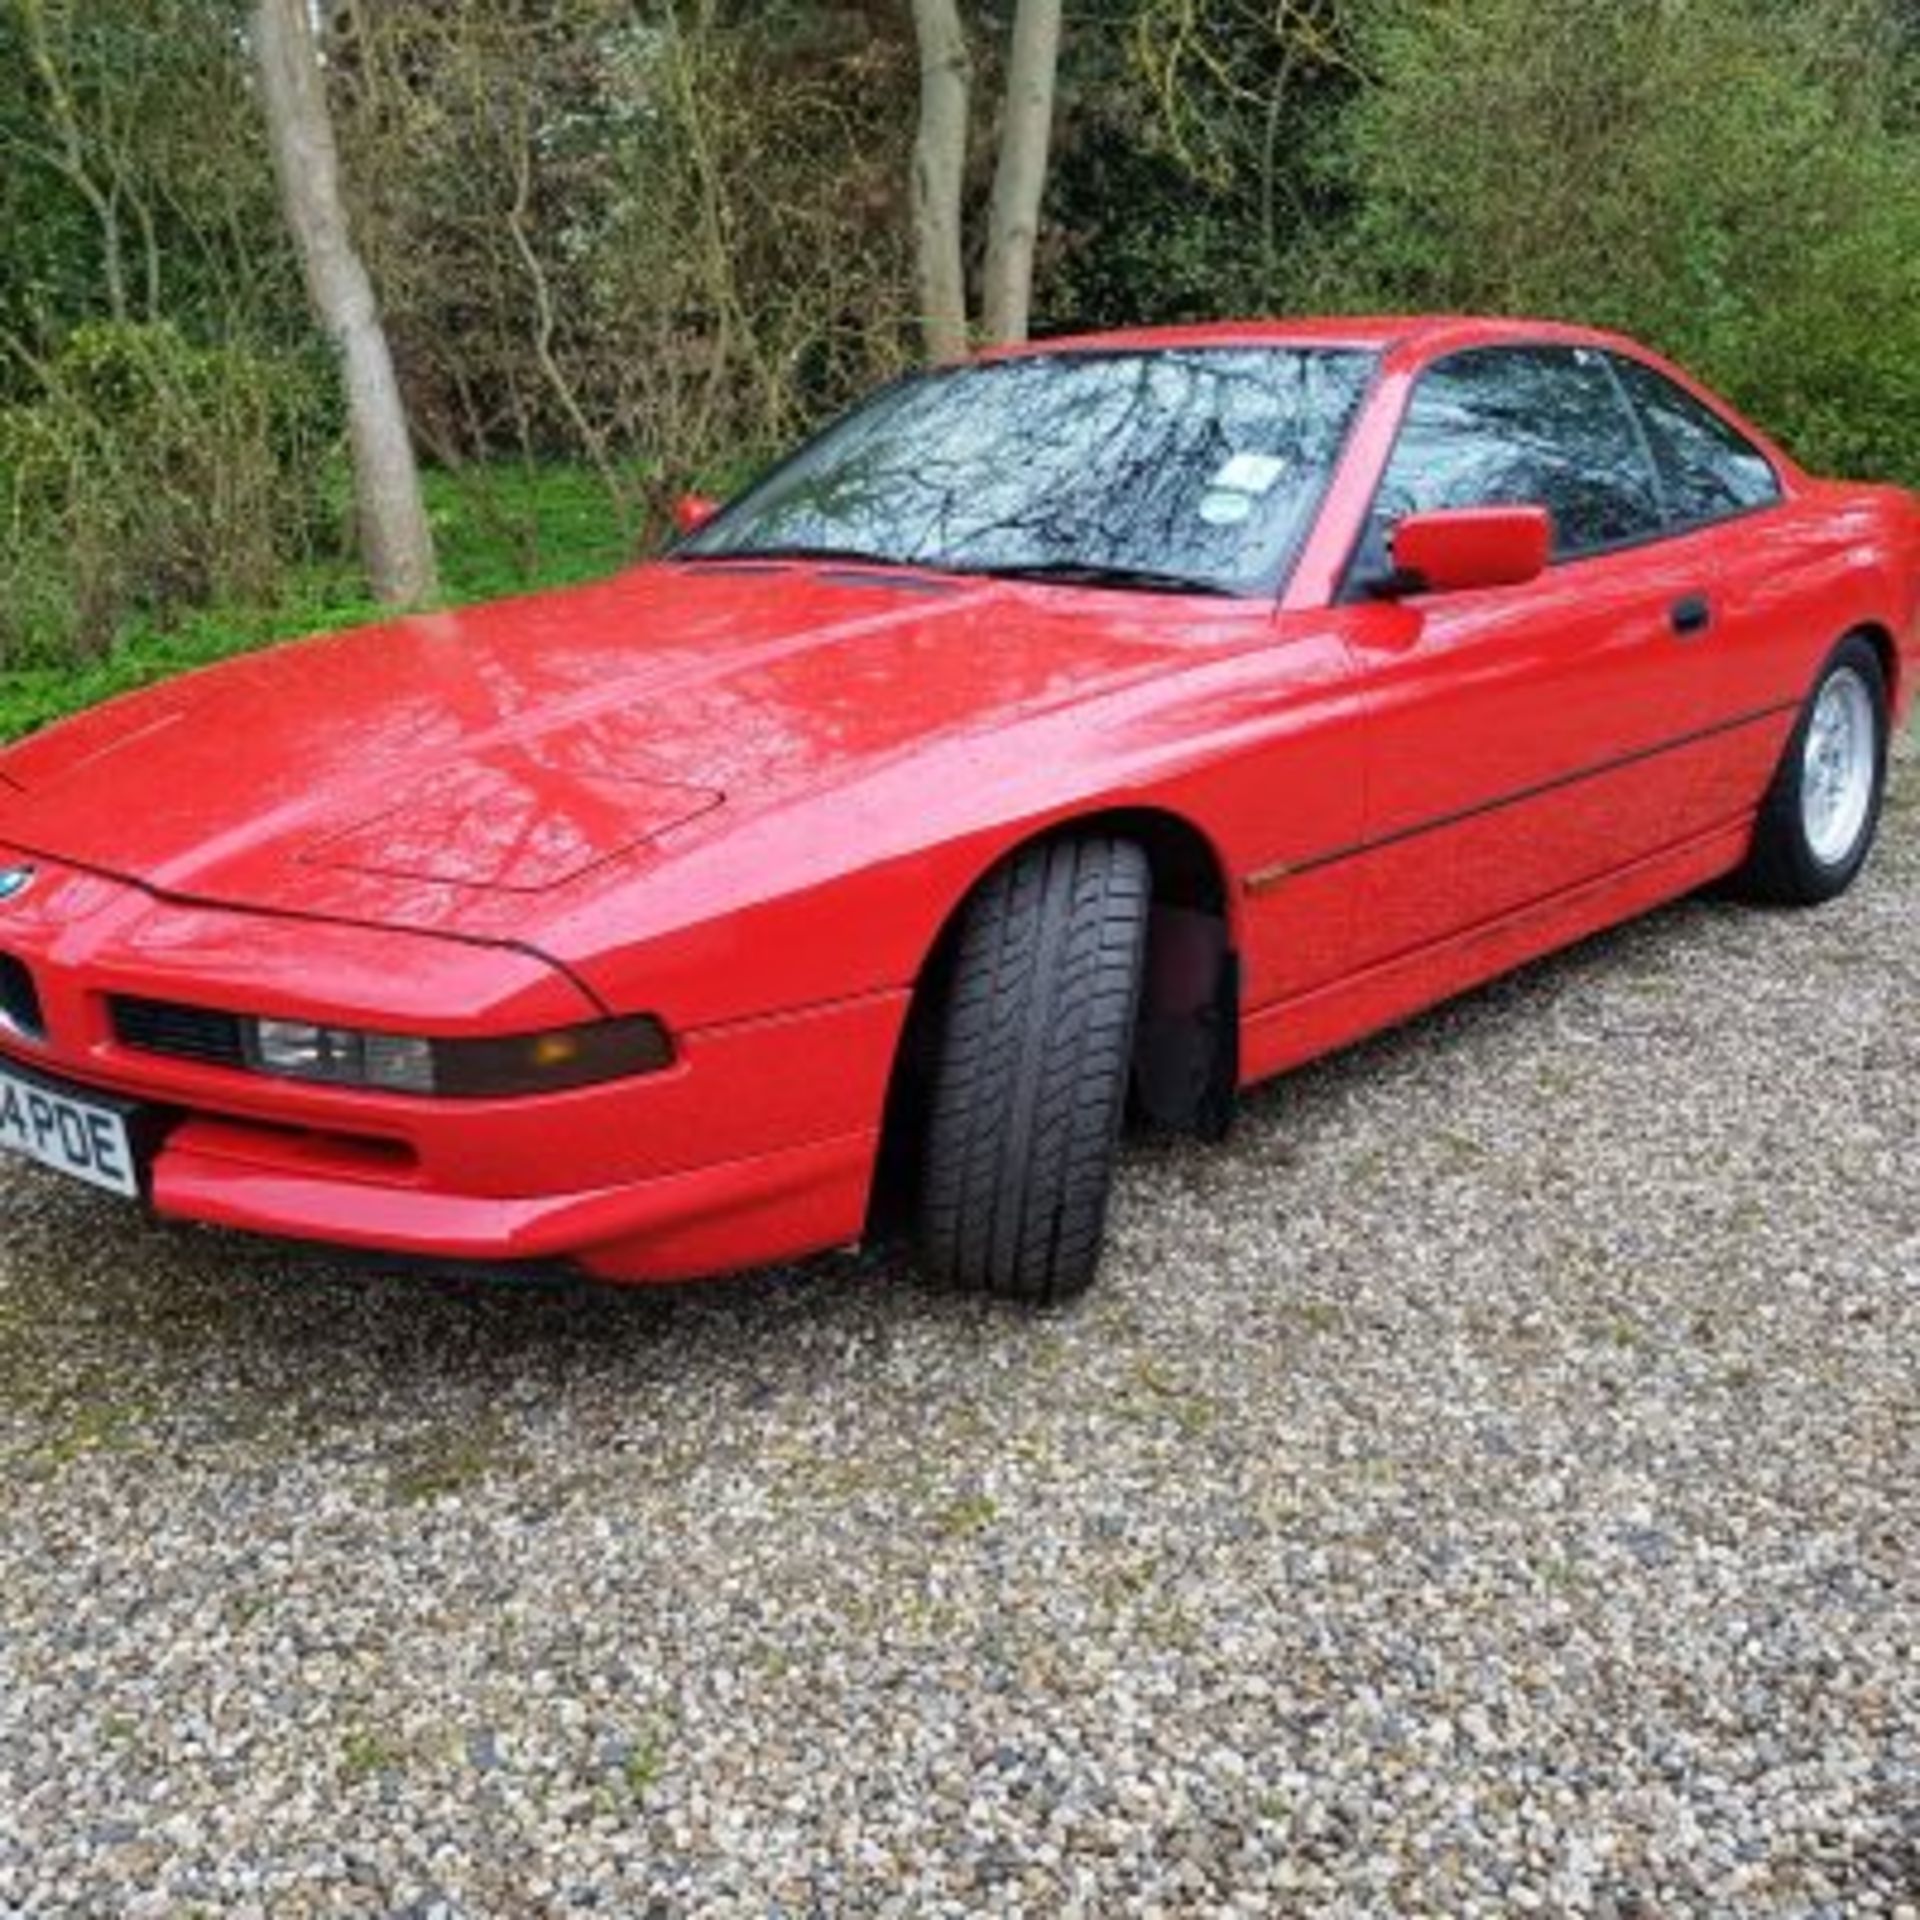 BMW 850i Same owner for the last 20 years. 1991 - This very pretty BMW 850i comes to us having - Image 2 of 12